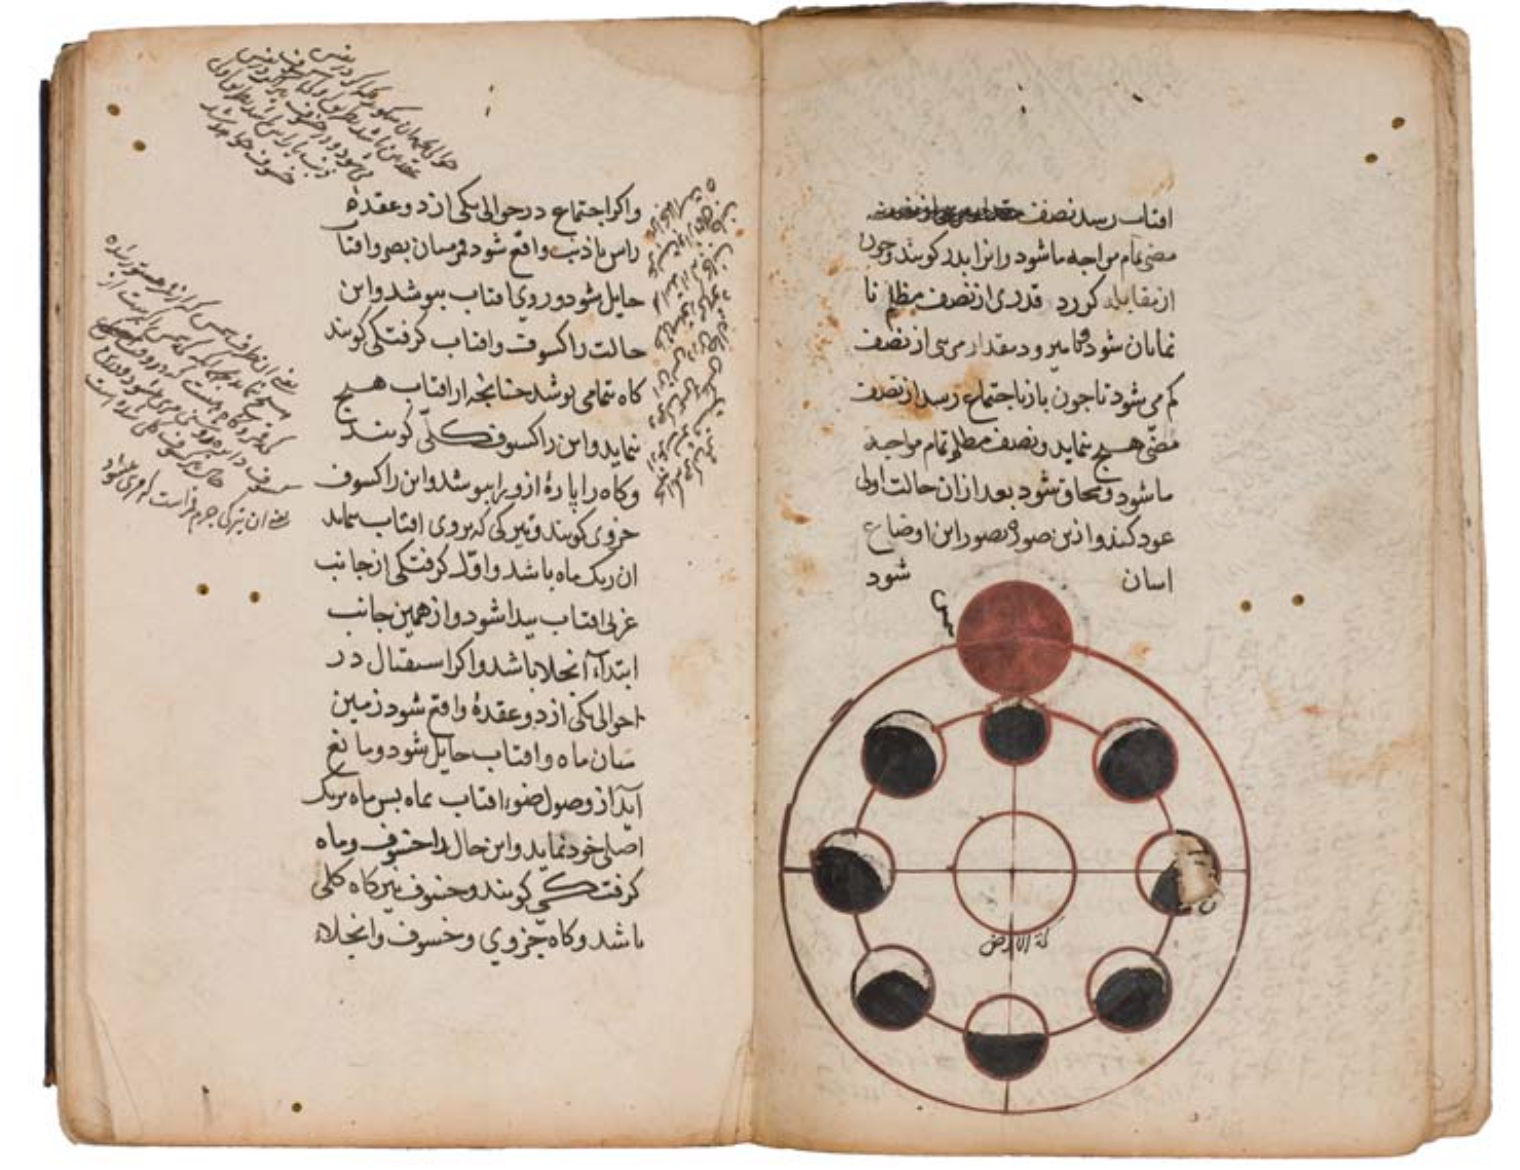 Illustrated Astronomical Treatise (2)